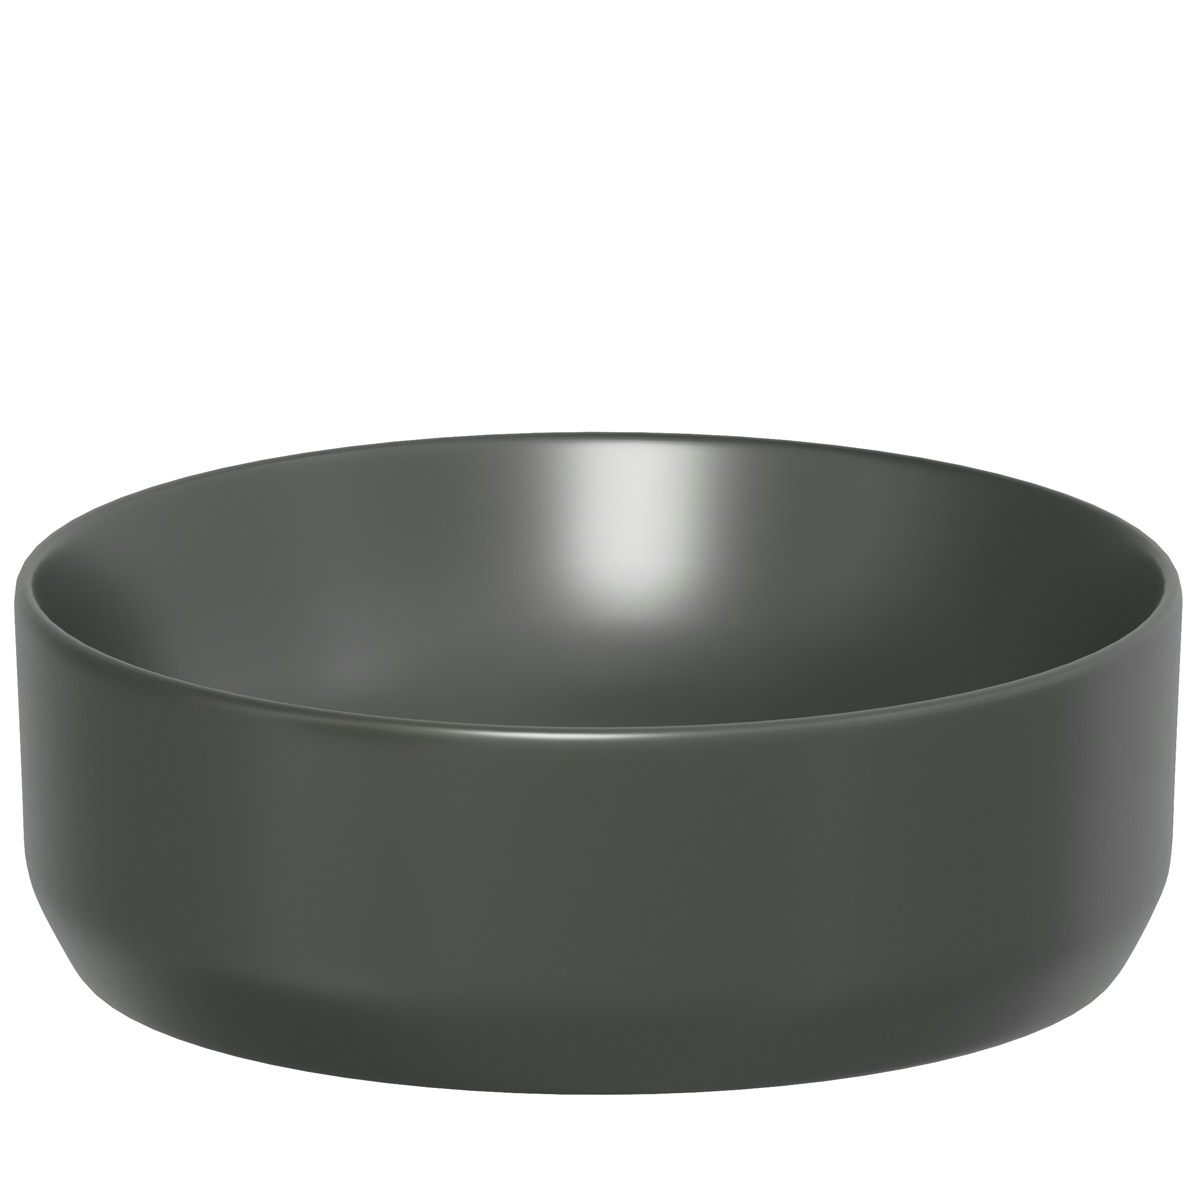 Mode Orion charcoal grey coloured countertop basin 355mm